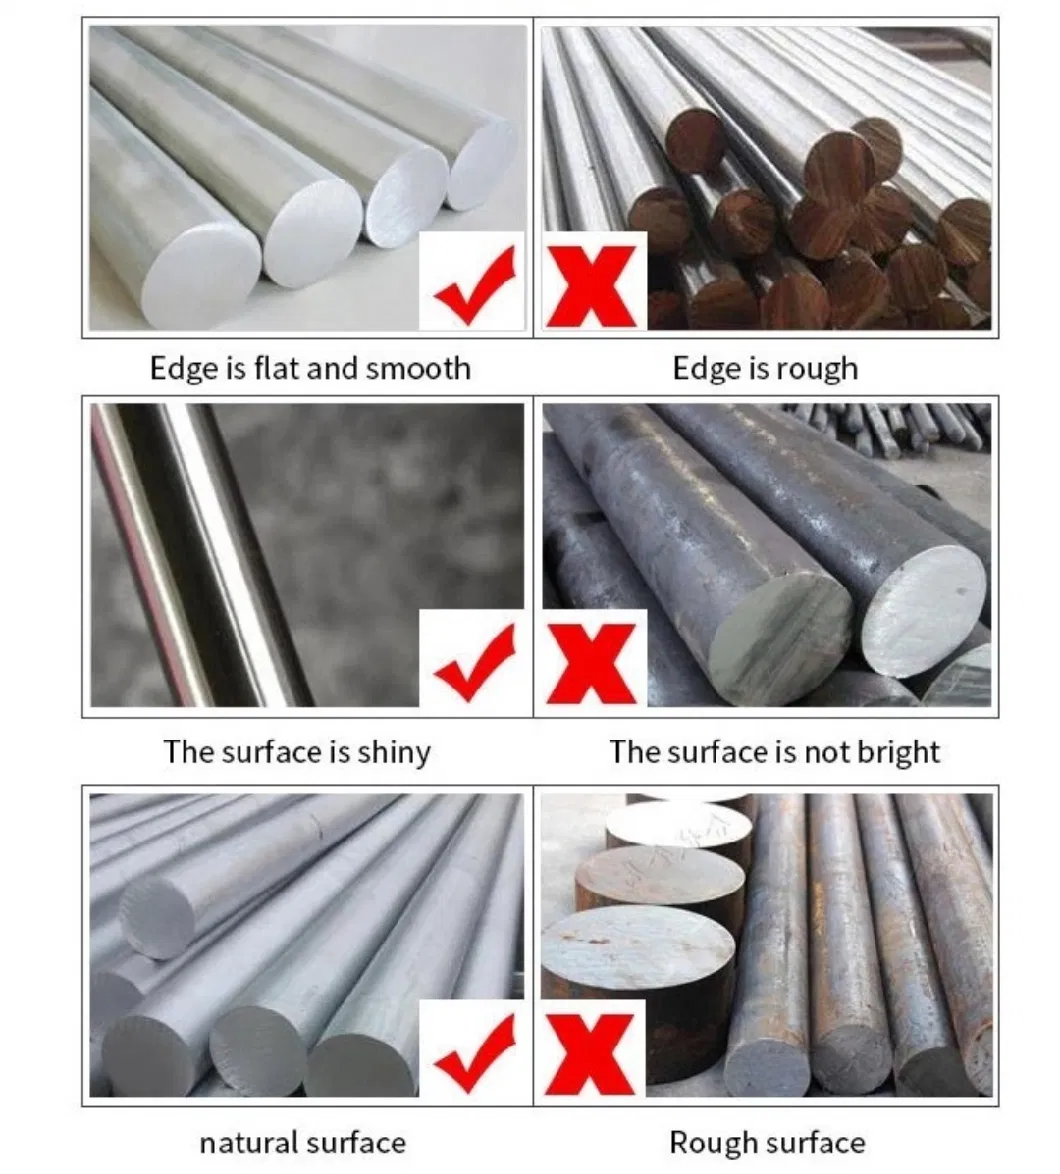 China Factory Size 1mm 1.5mm 2mm 2.5mm 3mm 4mm 4.5mm 5mm 7mm 20mm 25mm 30mm Stainless Steel Rod